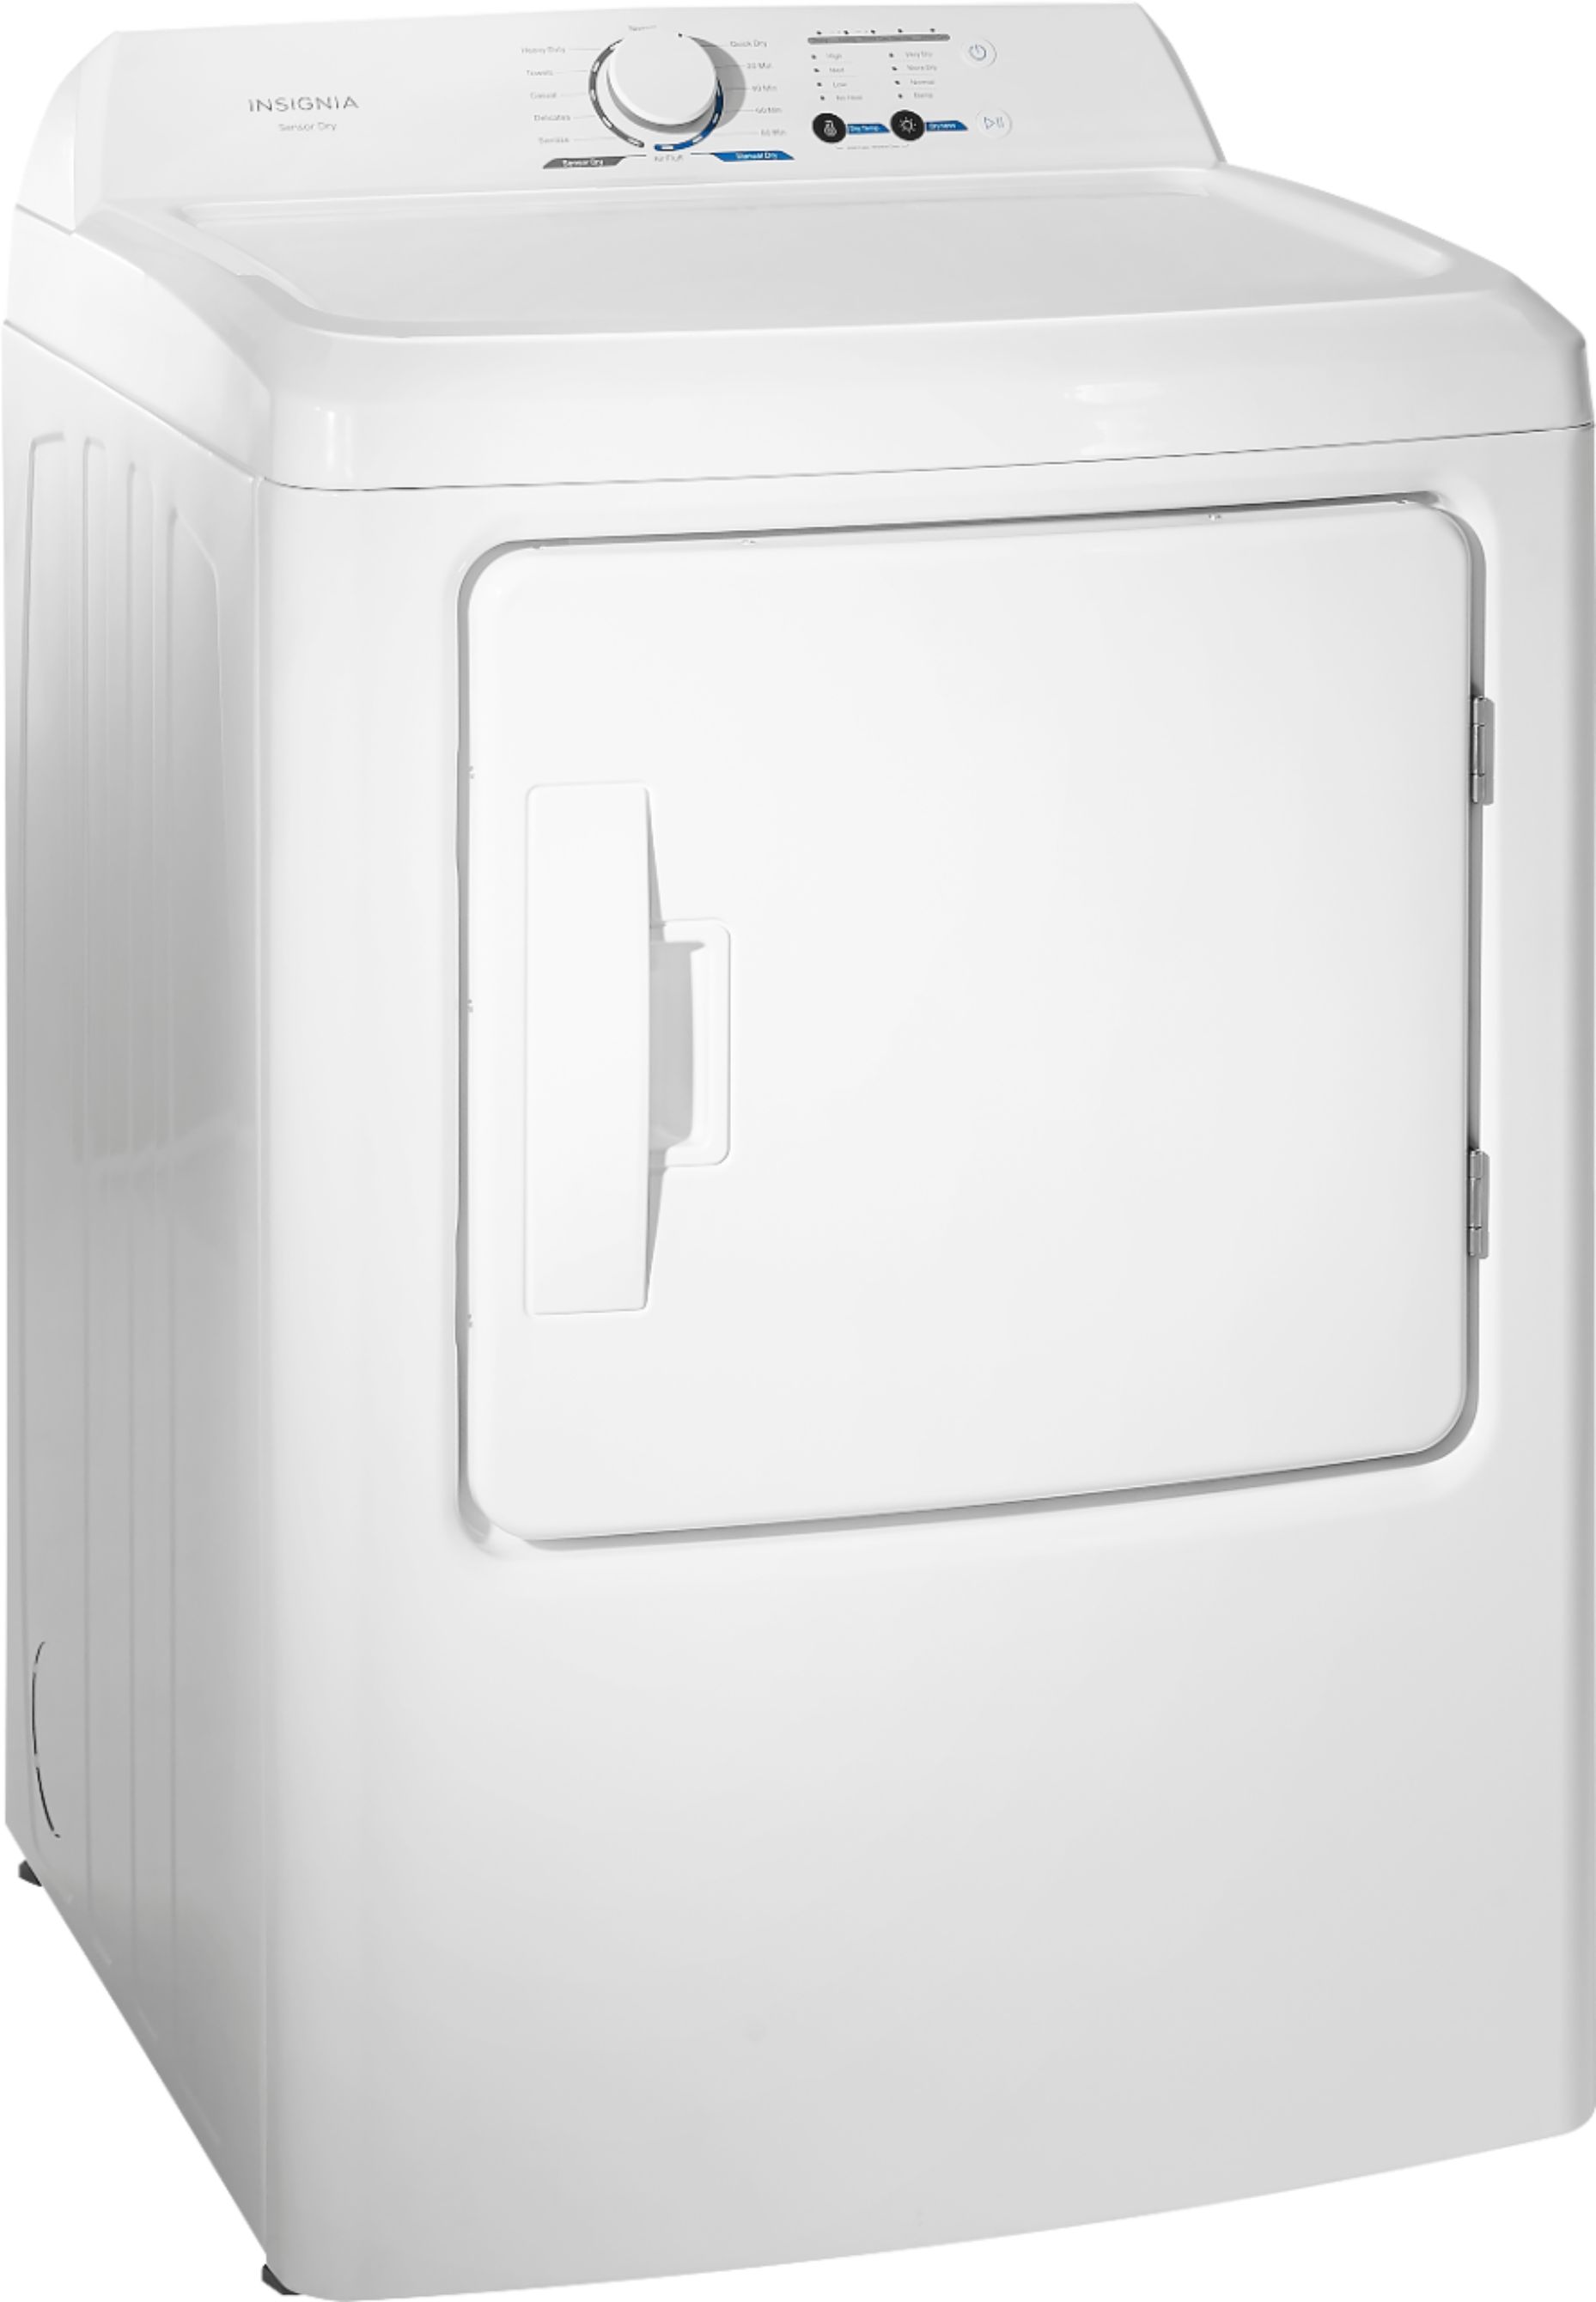 Angle View: Insignia™ - 6.7 Cu. Ft. 12-Cycle Electric Dryer - White